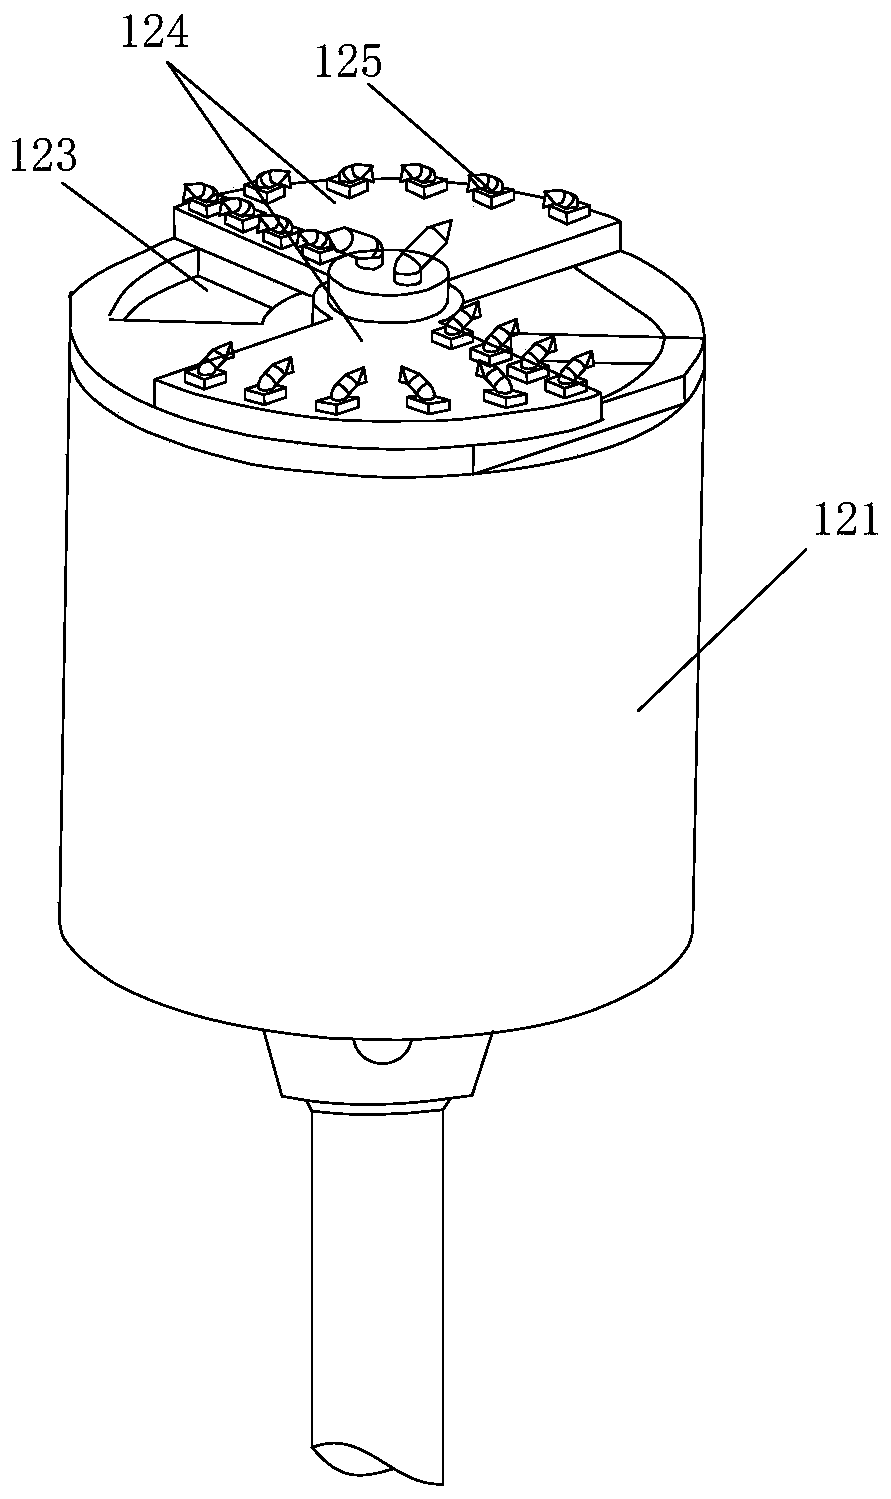 Contaminated soil closed sampling system and soil sampling and replacement remediation method